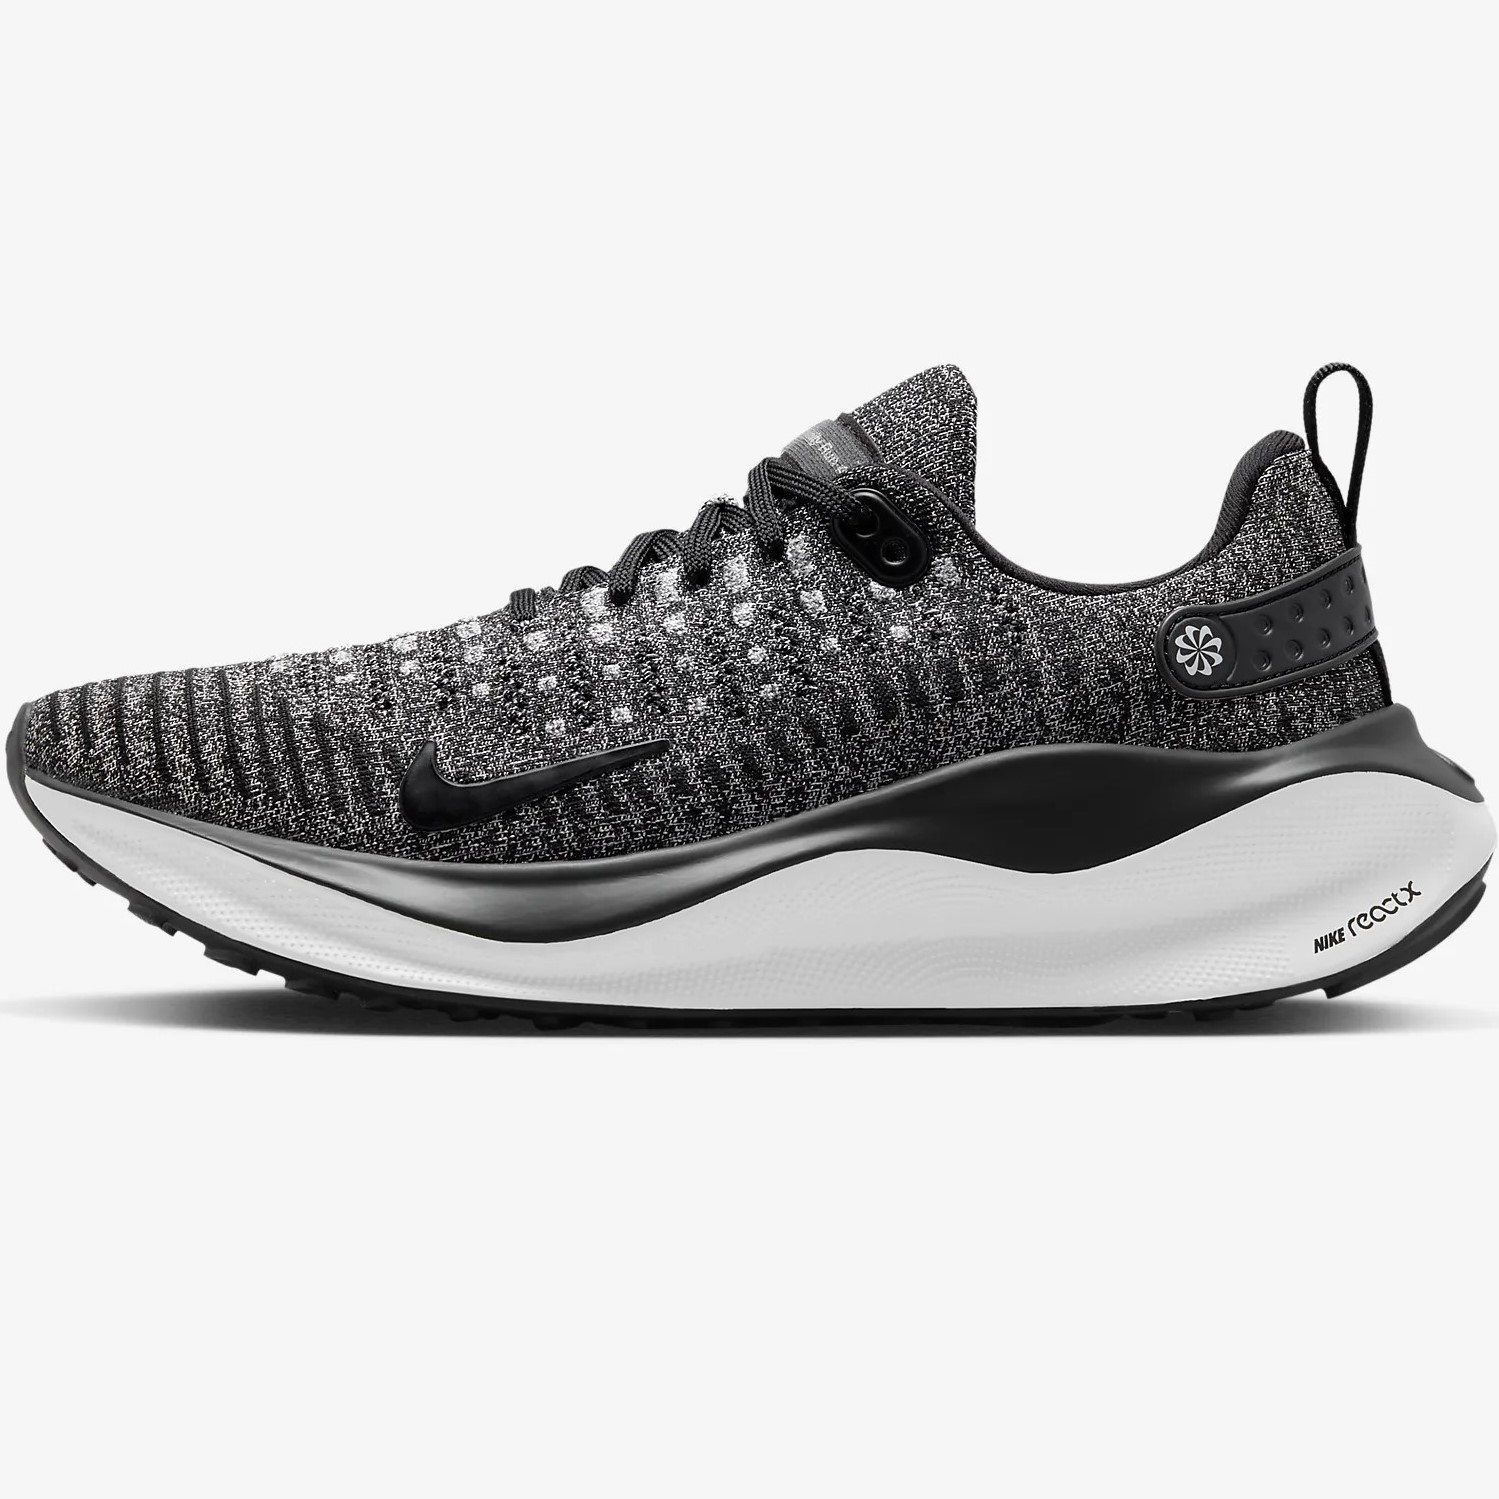 GIÀY SNEAKER THỂ THAO NIKE REACTX INFINITYRN 4 OREO ROAD RUNNING SHOES DR2670-003 6